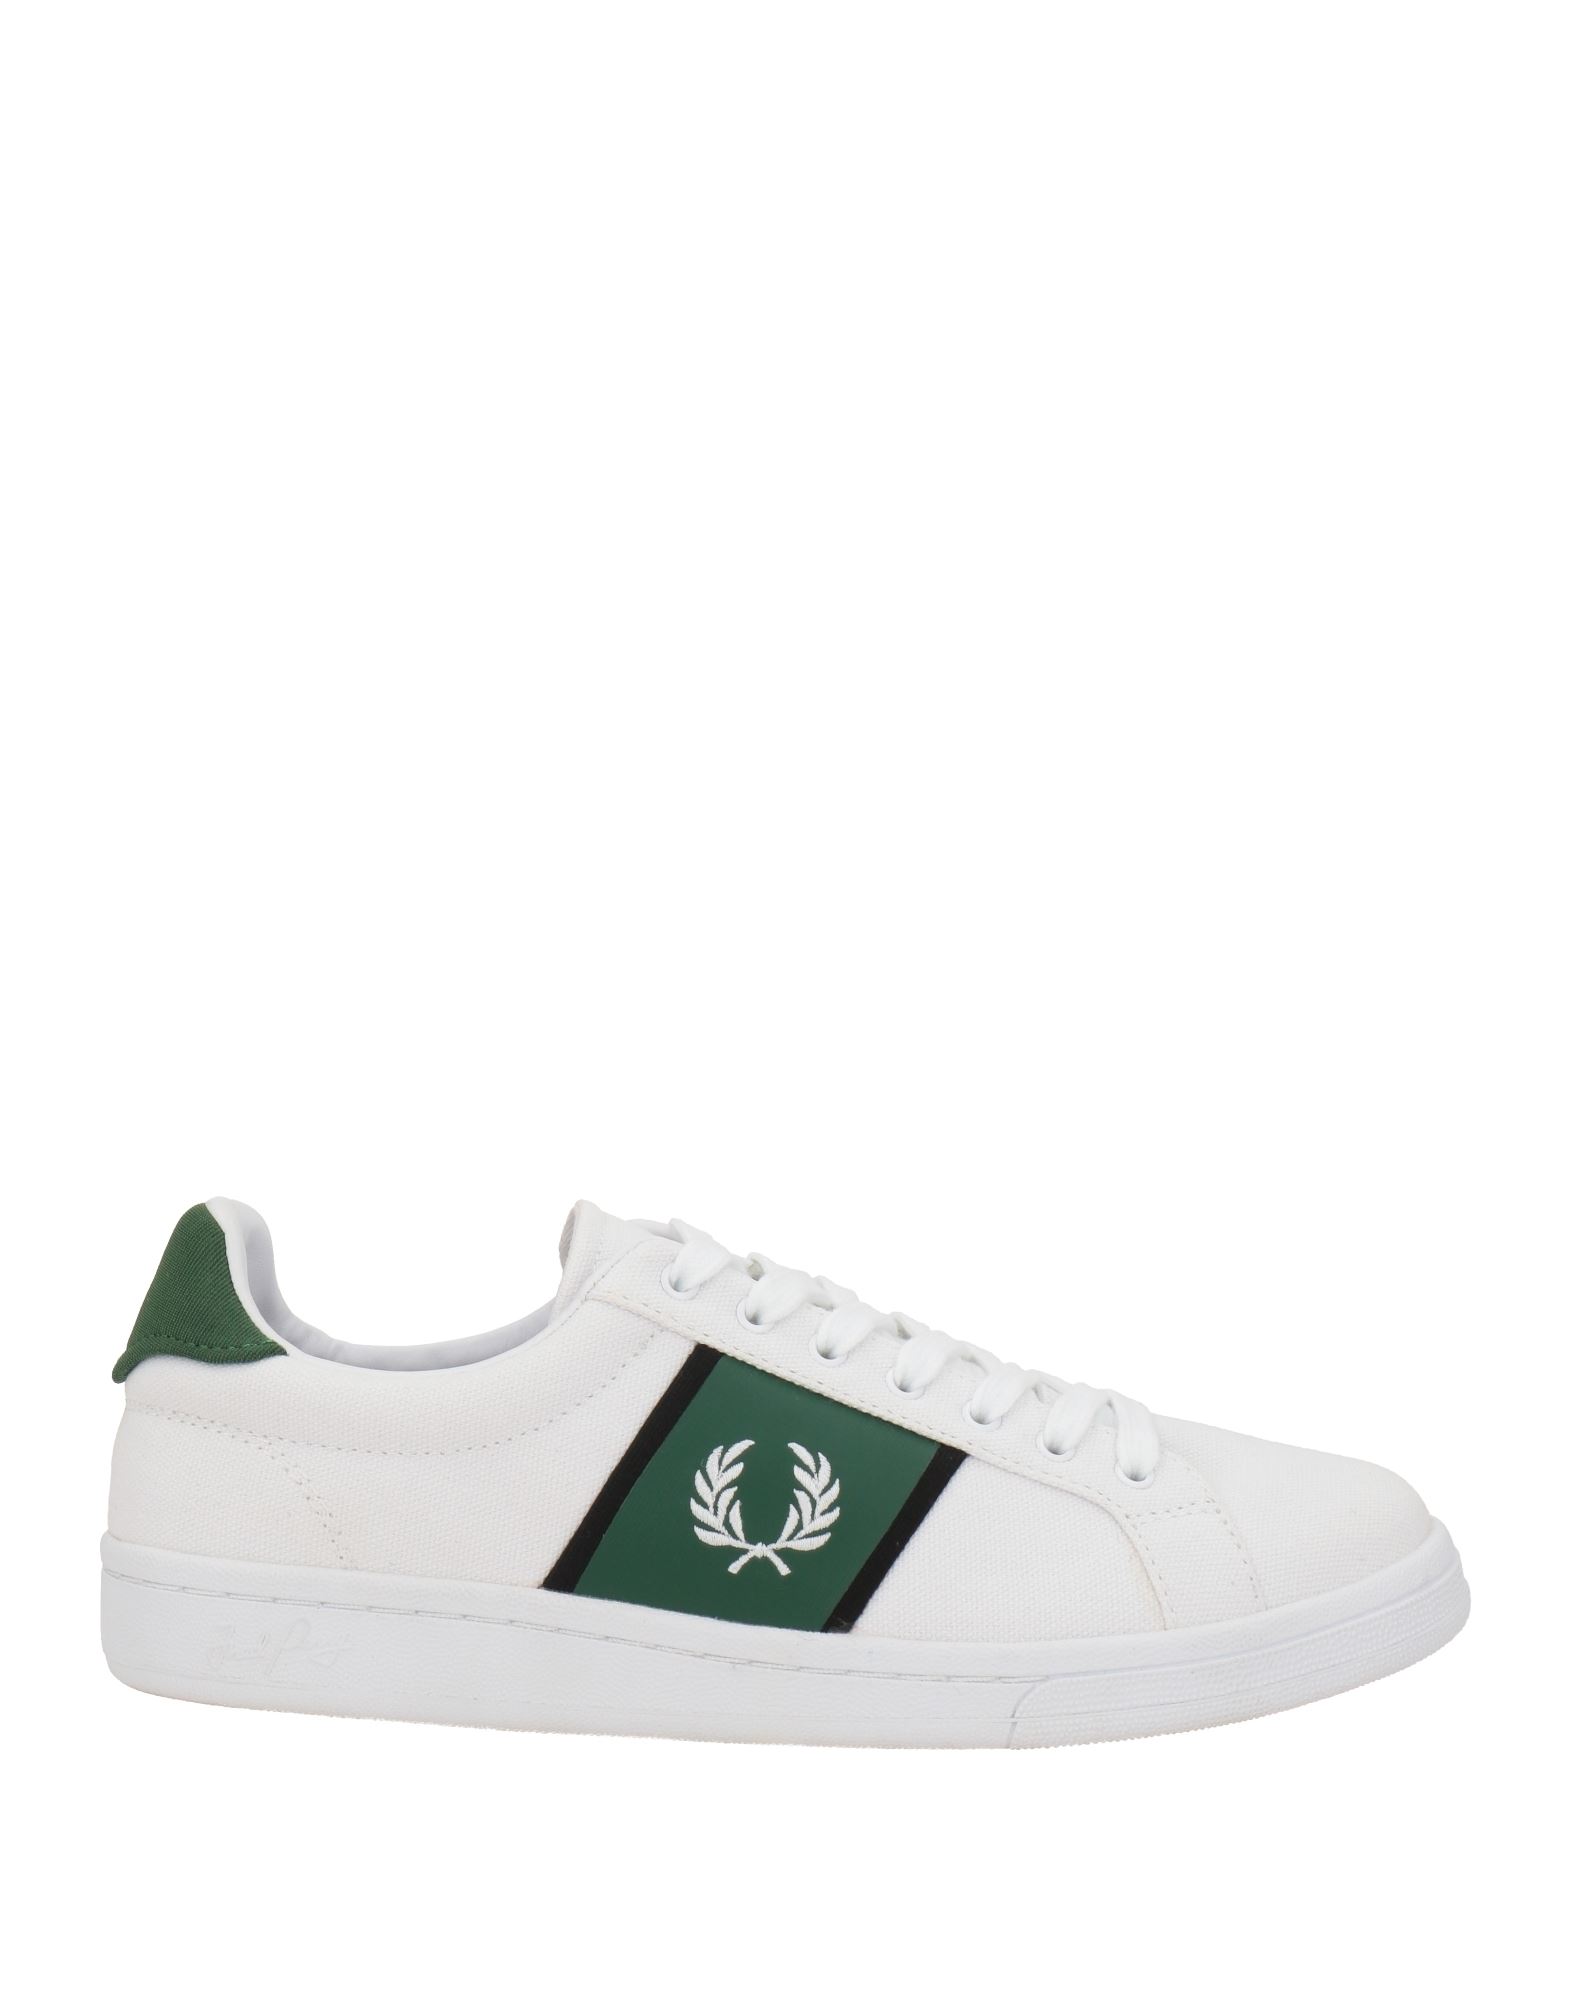 FRED PERRY FRED PERRY MAN SNEAKERS OFF WHITE SIZE 7.5 TEXTILE FIBERS